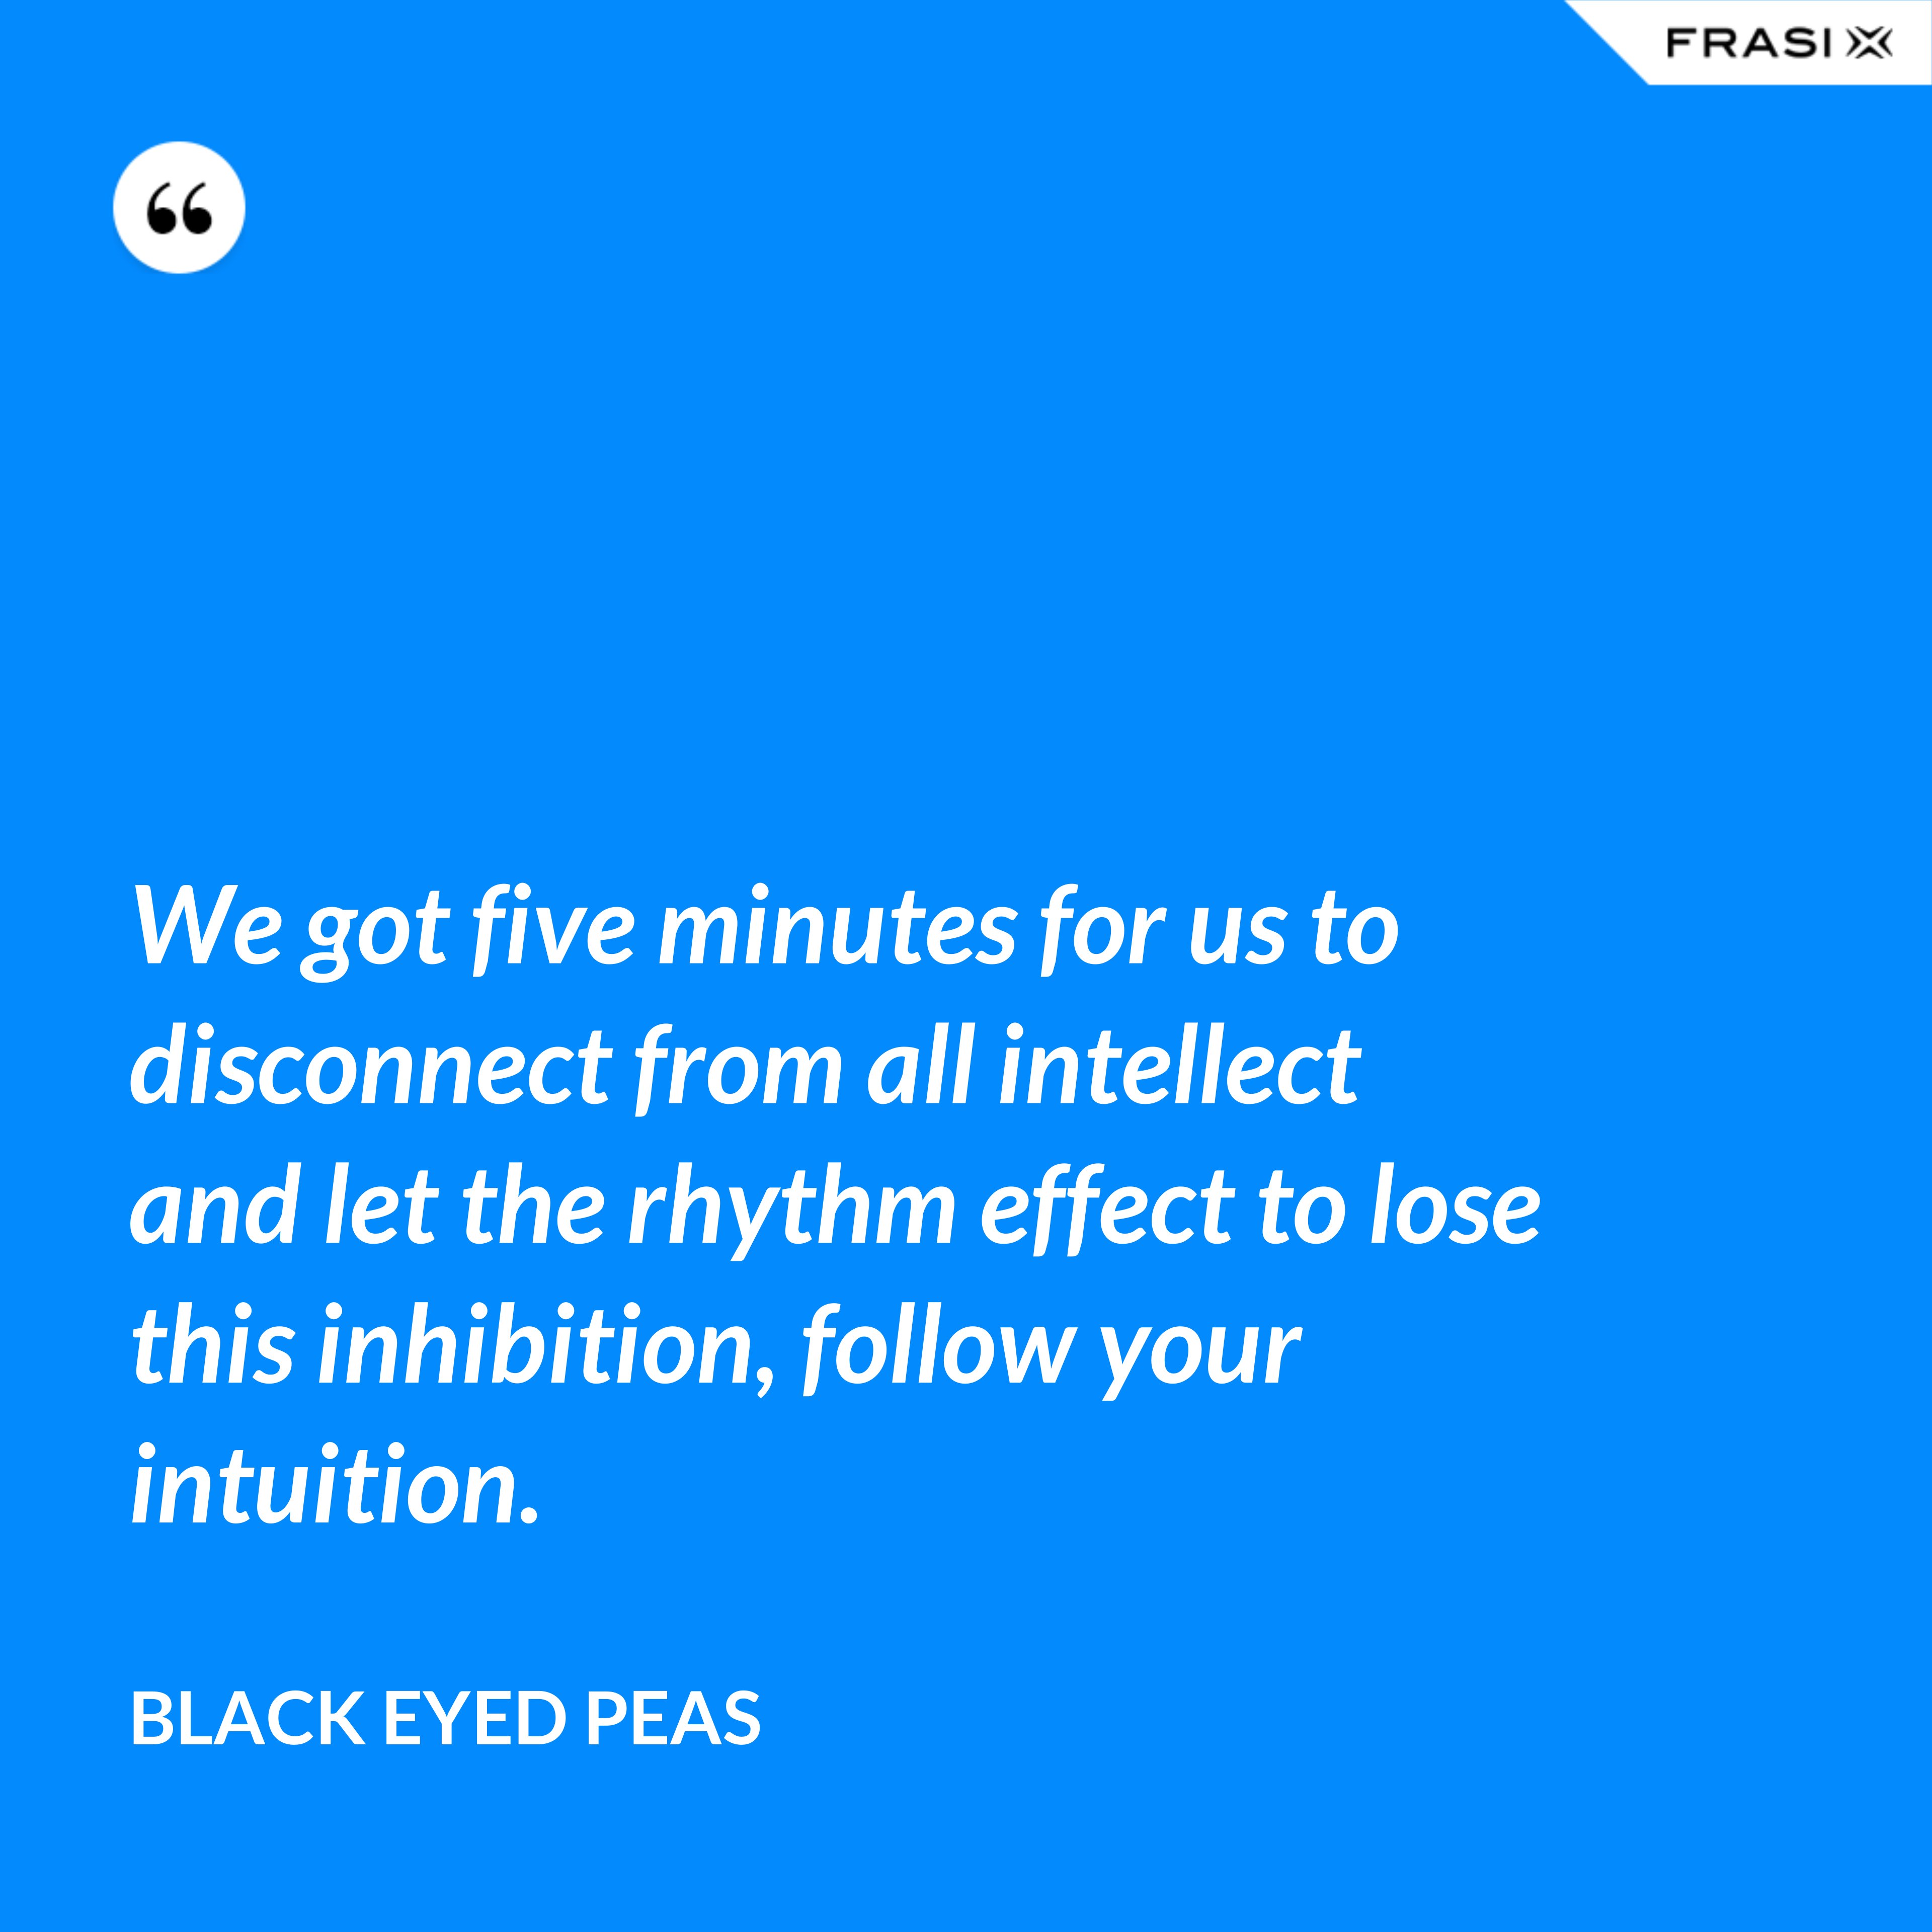 We got five minutes for us to disconnect from all intellect and let the rhythm effect to lose this inhibition, follow your intuition. - Black Eyed Peas